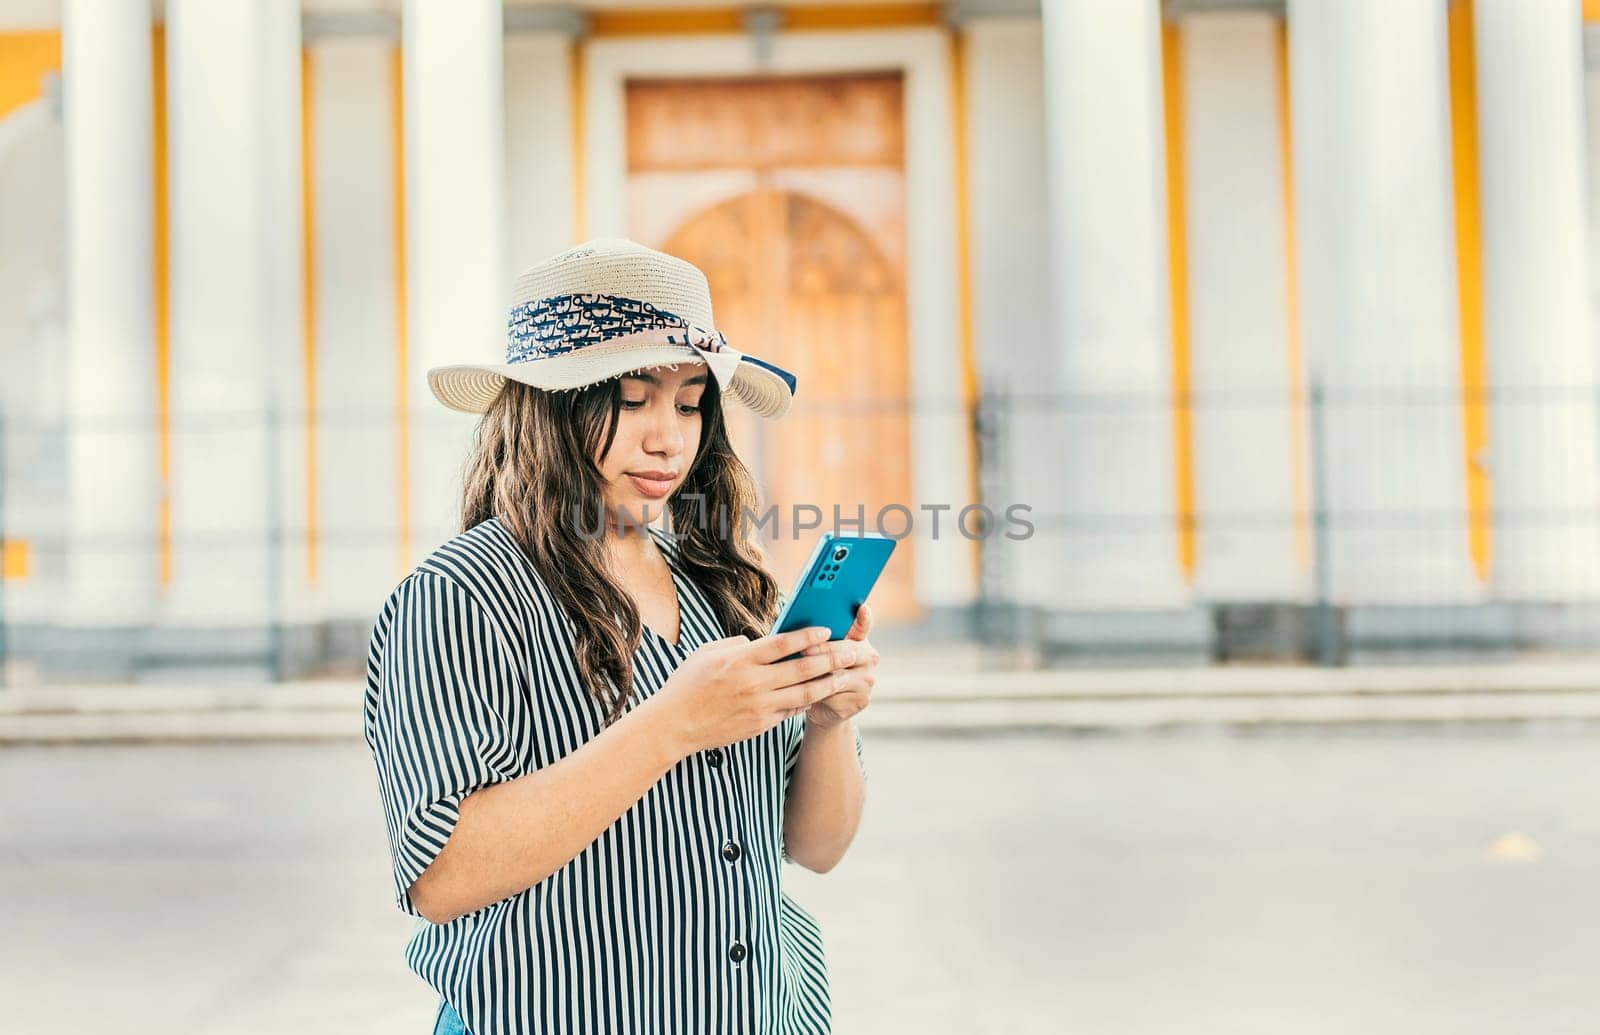 The girl wears a hat, stands in front of a Catholic church with a blurred background, is smiling and sending messages from her cell phone.